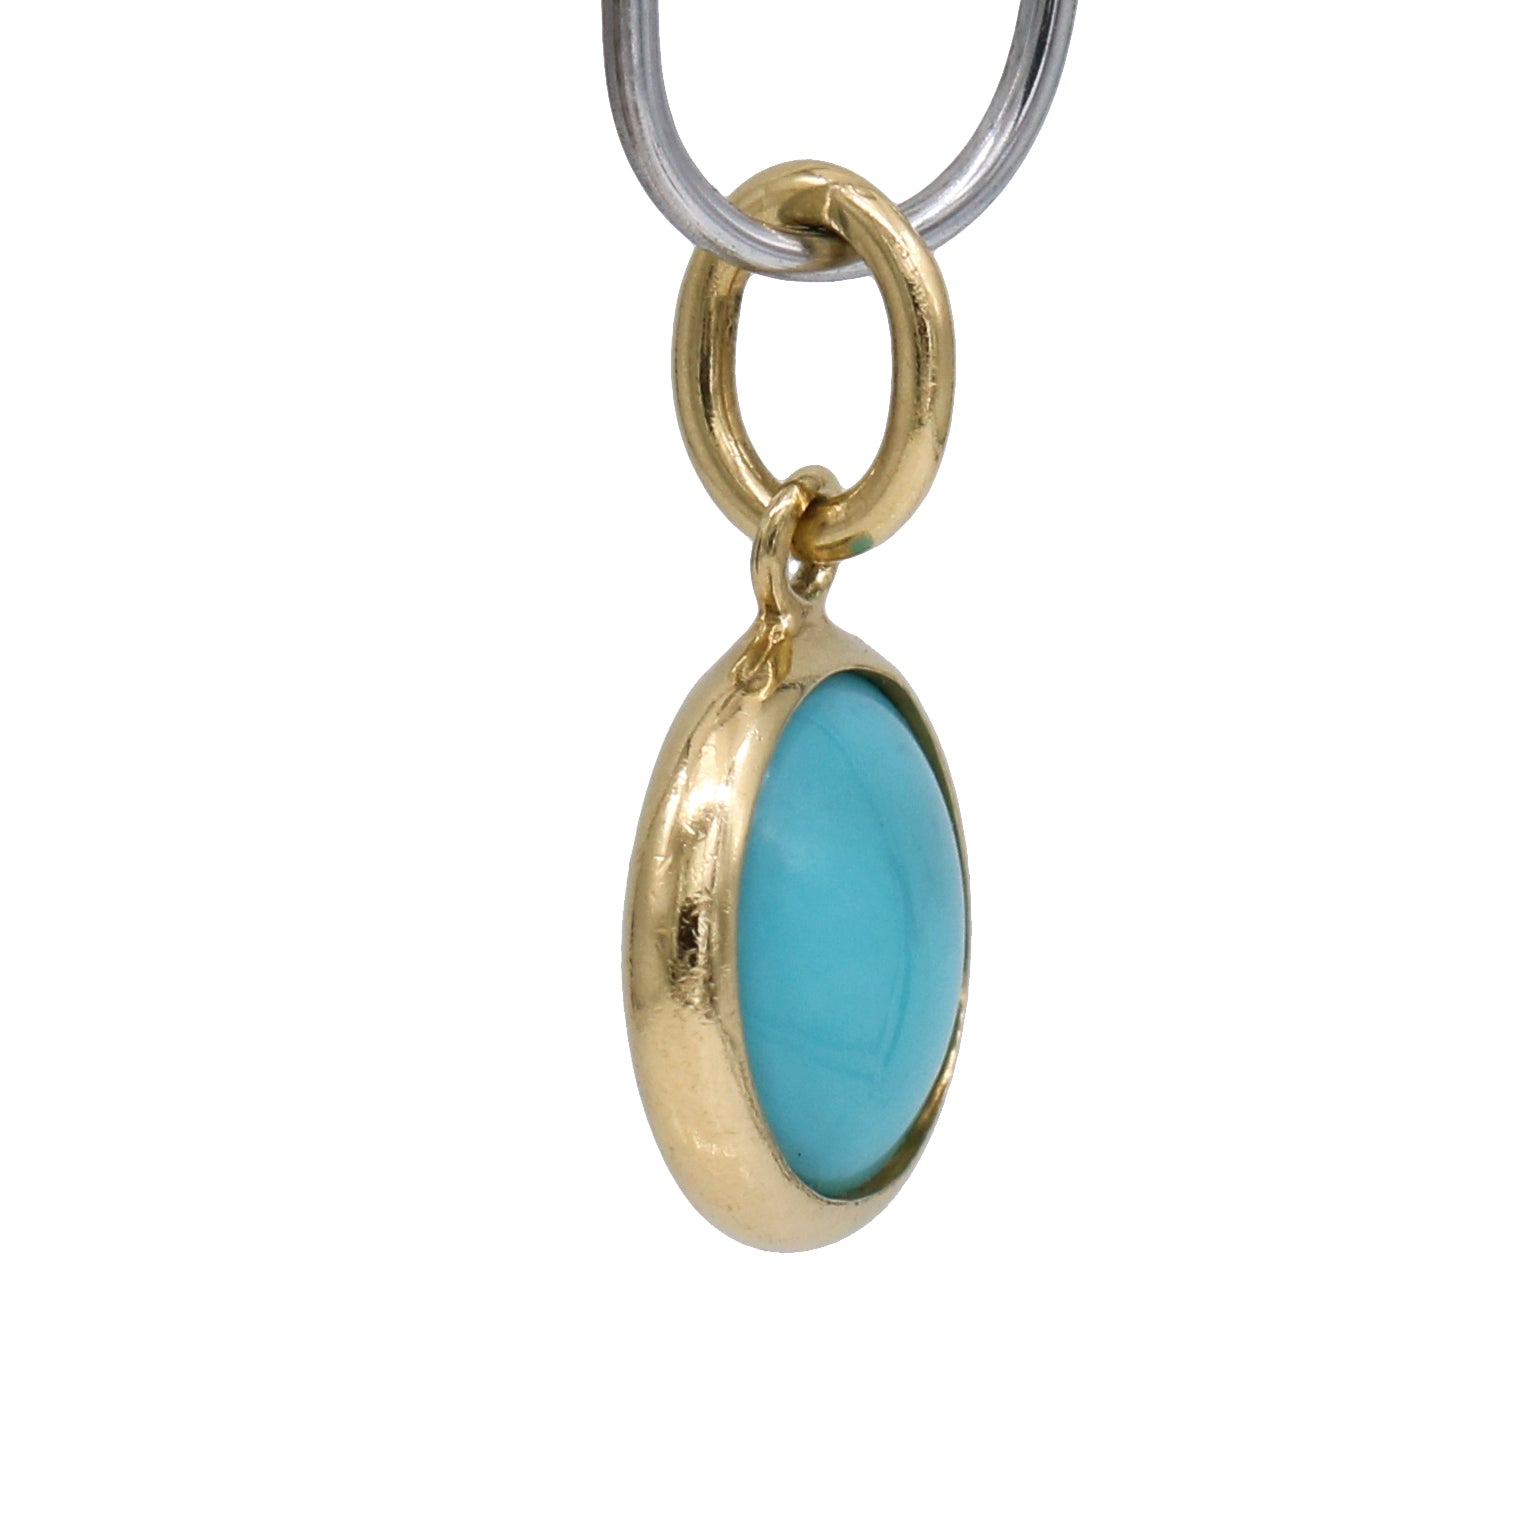 Tiffany & Co. Paloma Picasso Turquoise Dot Charm in 18k Yellow Gold